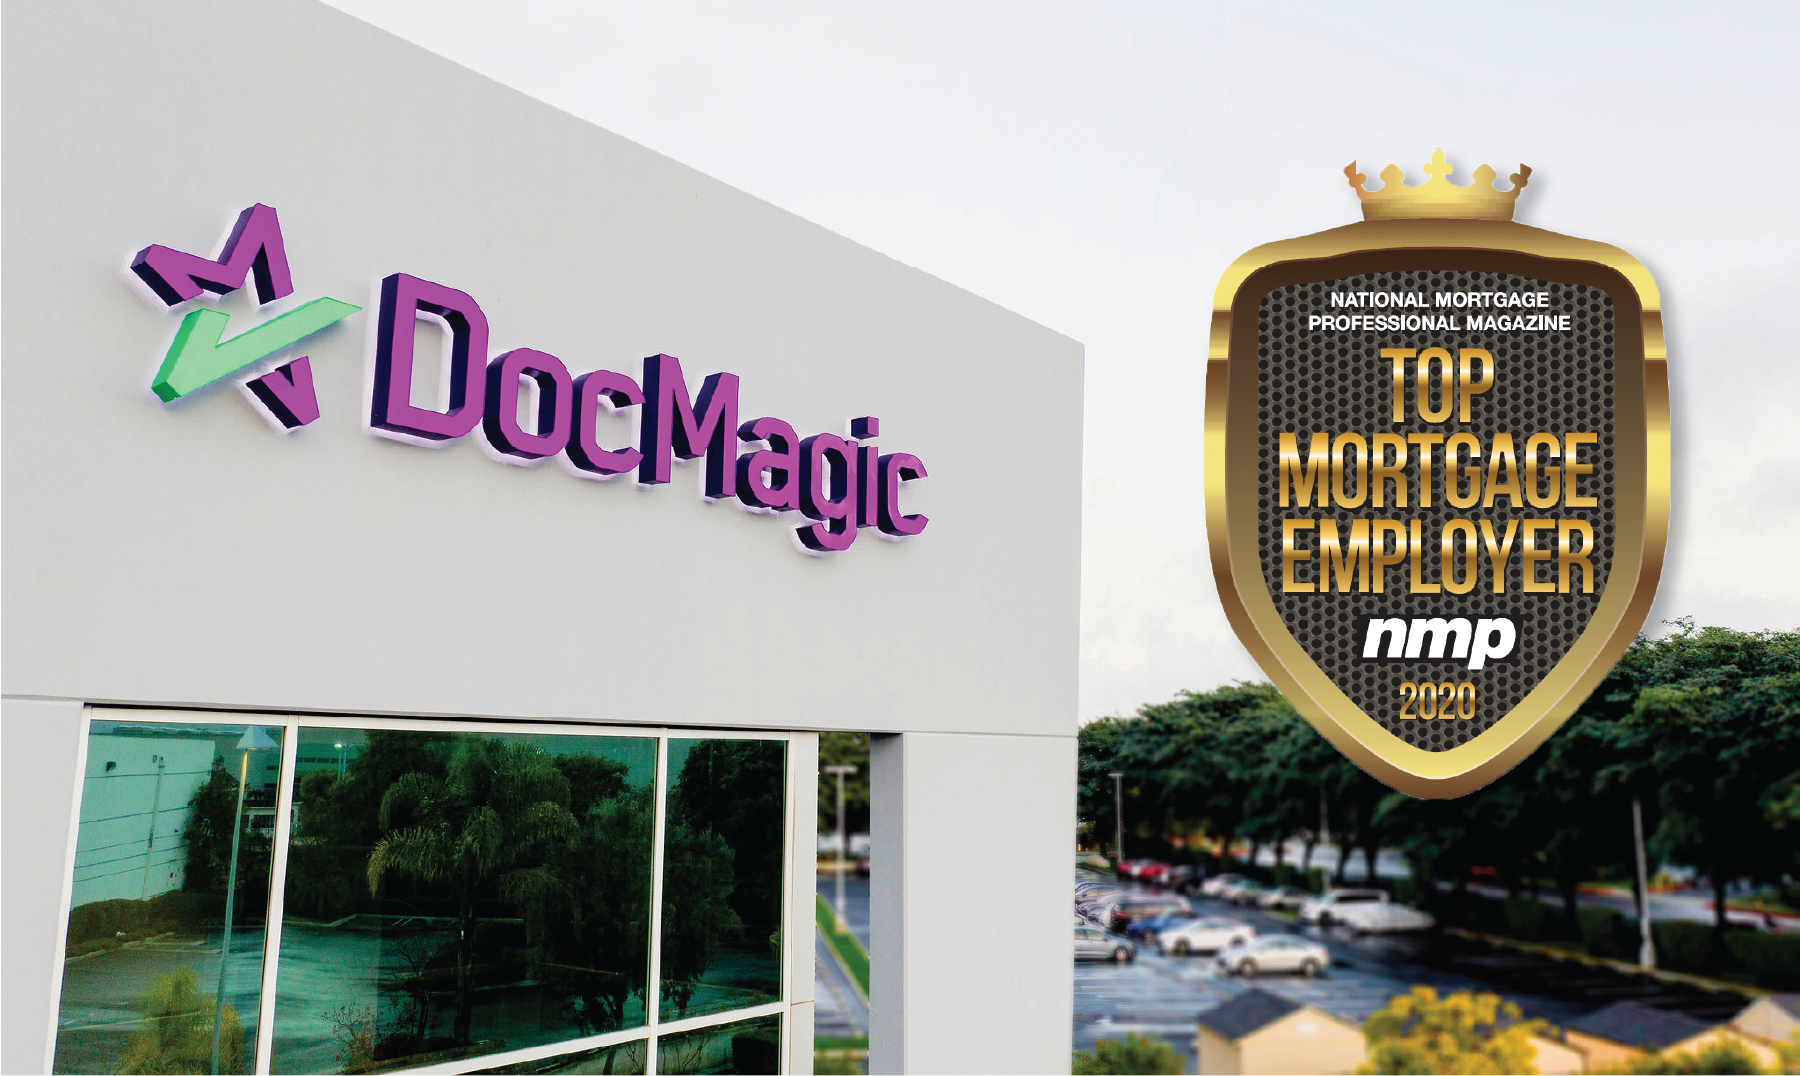 DocMagic has been named a Top Mortgage Employer by National Mortgage Professional Magazine for the fourth year in a row.